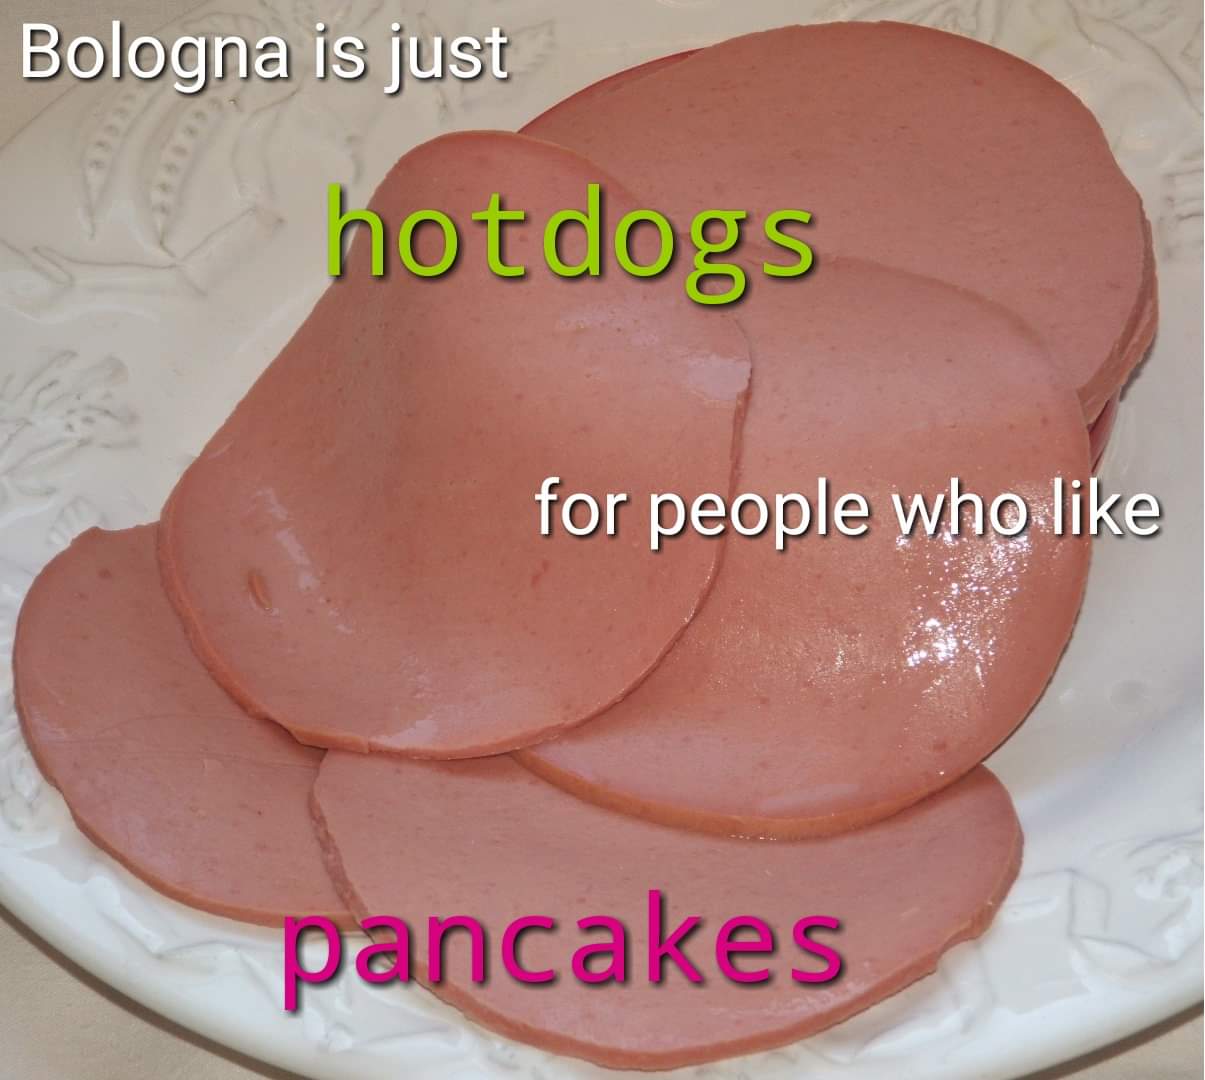 bologna meme - Bologna is just hotdogs for people who pancakes